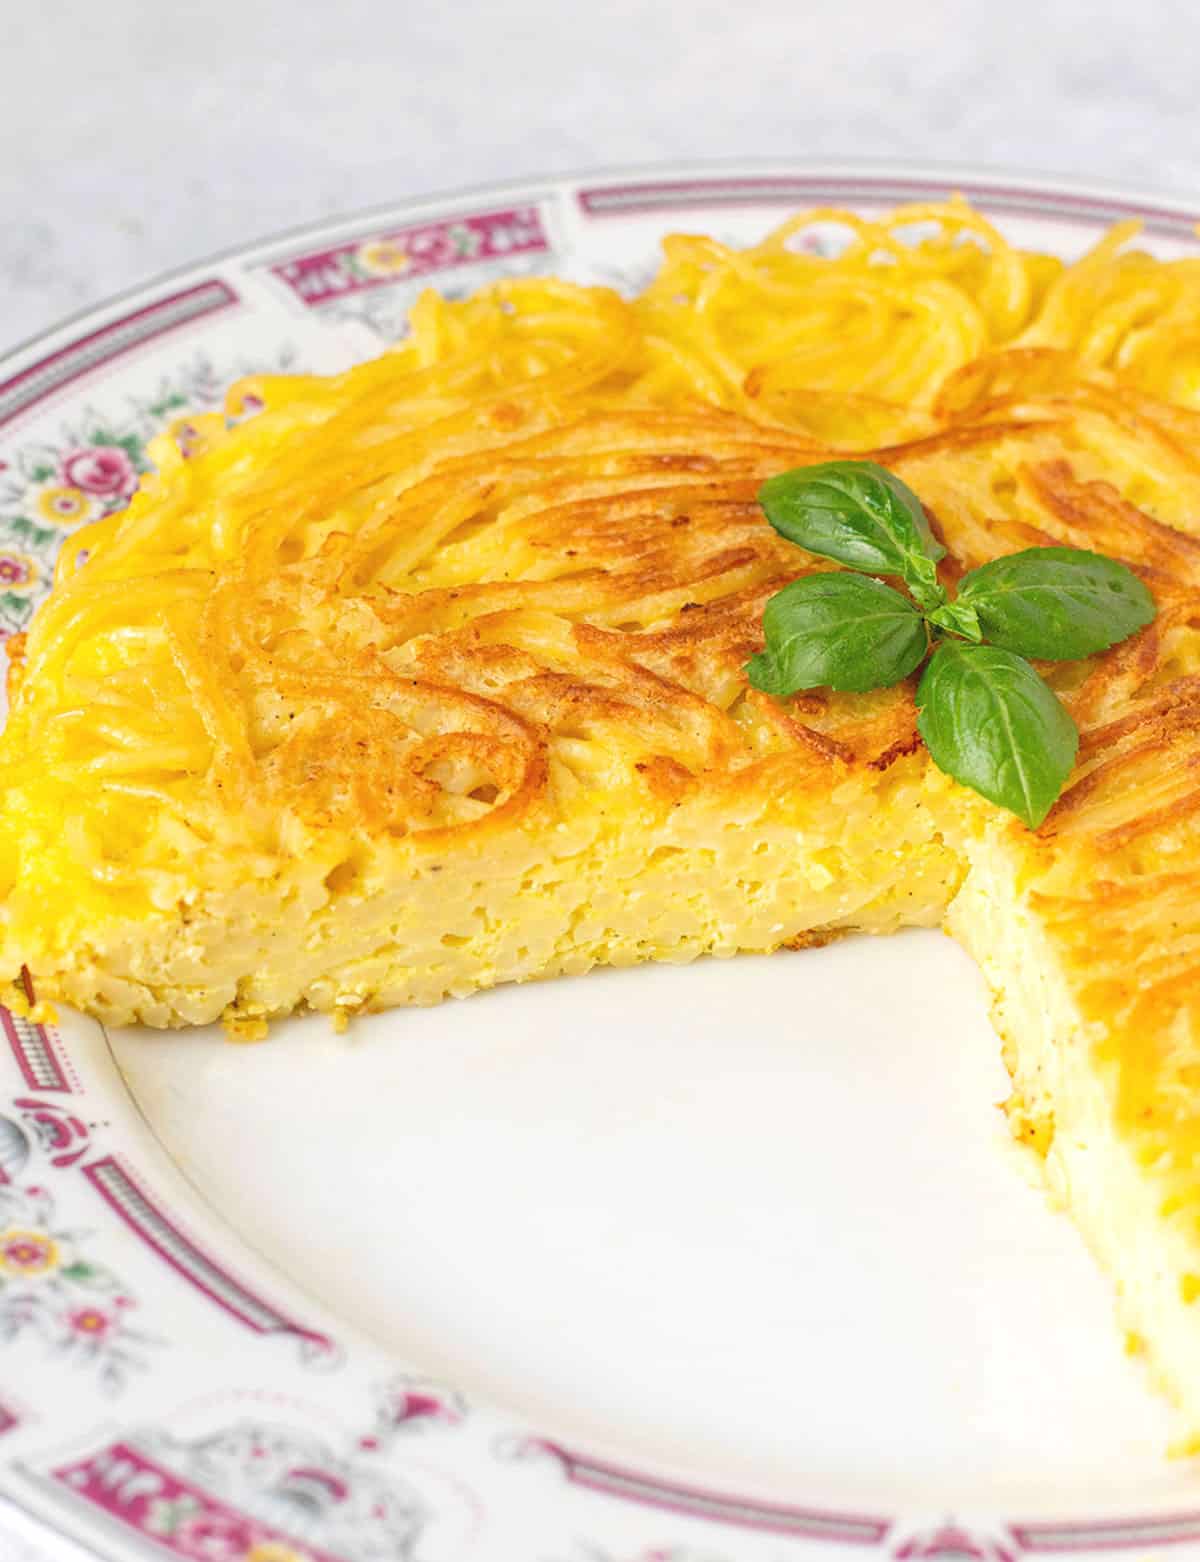 prepared spaghetti frittata with a slice cut out of it.